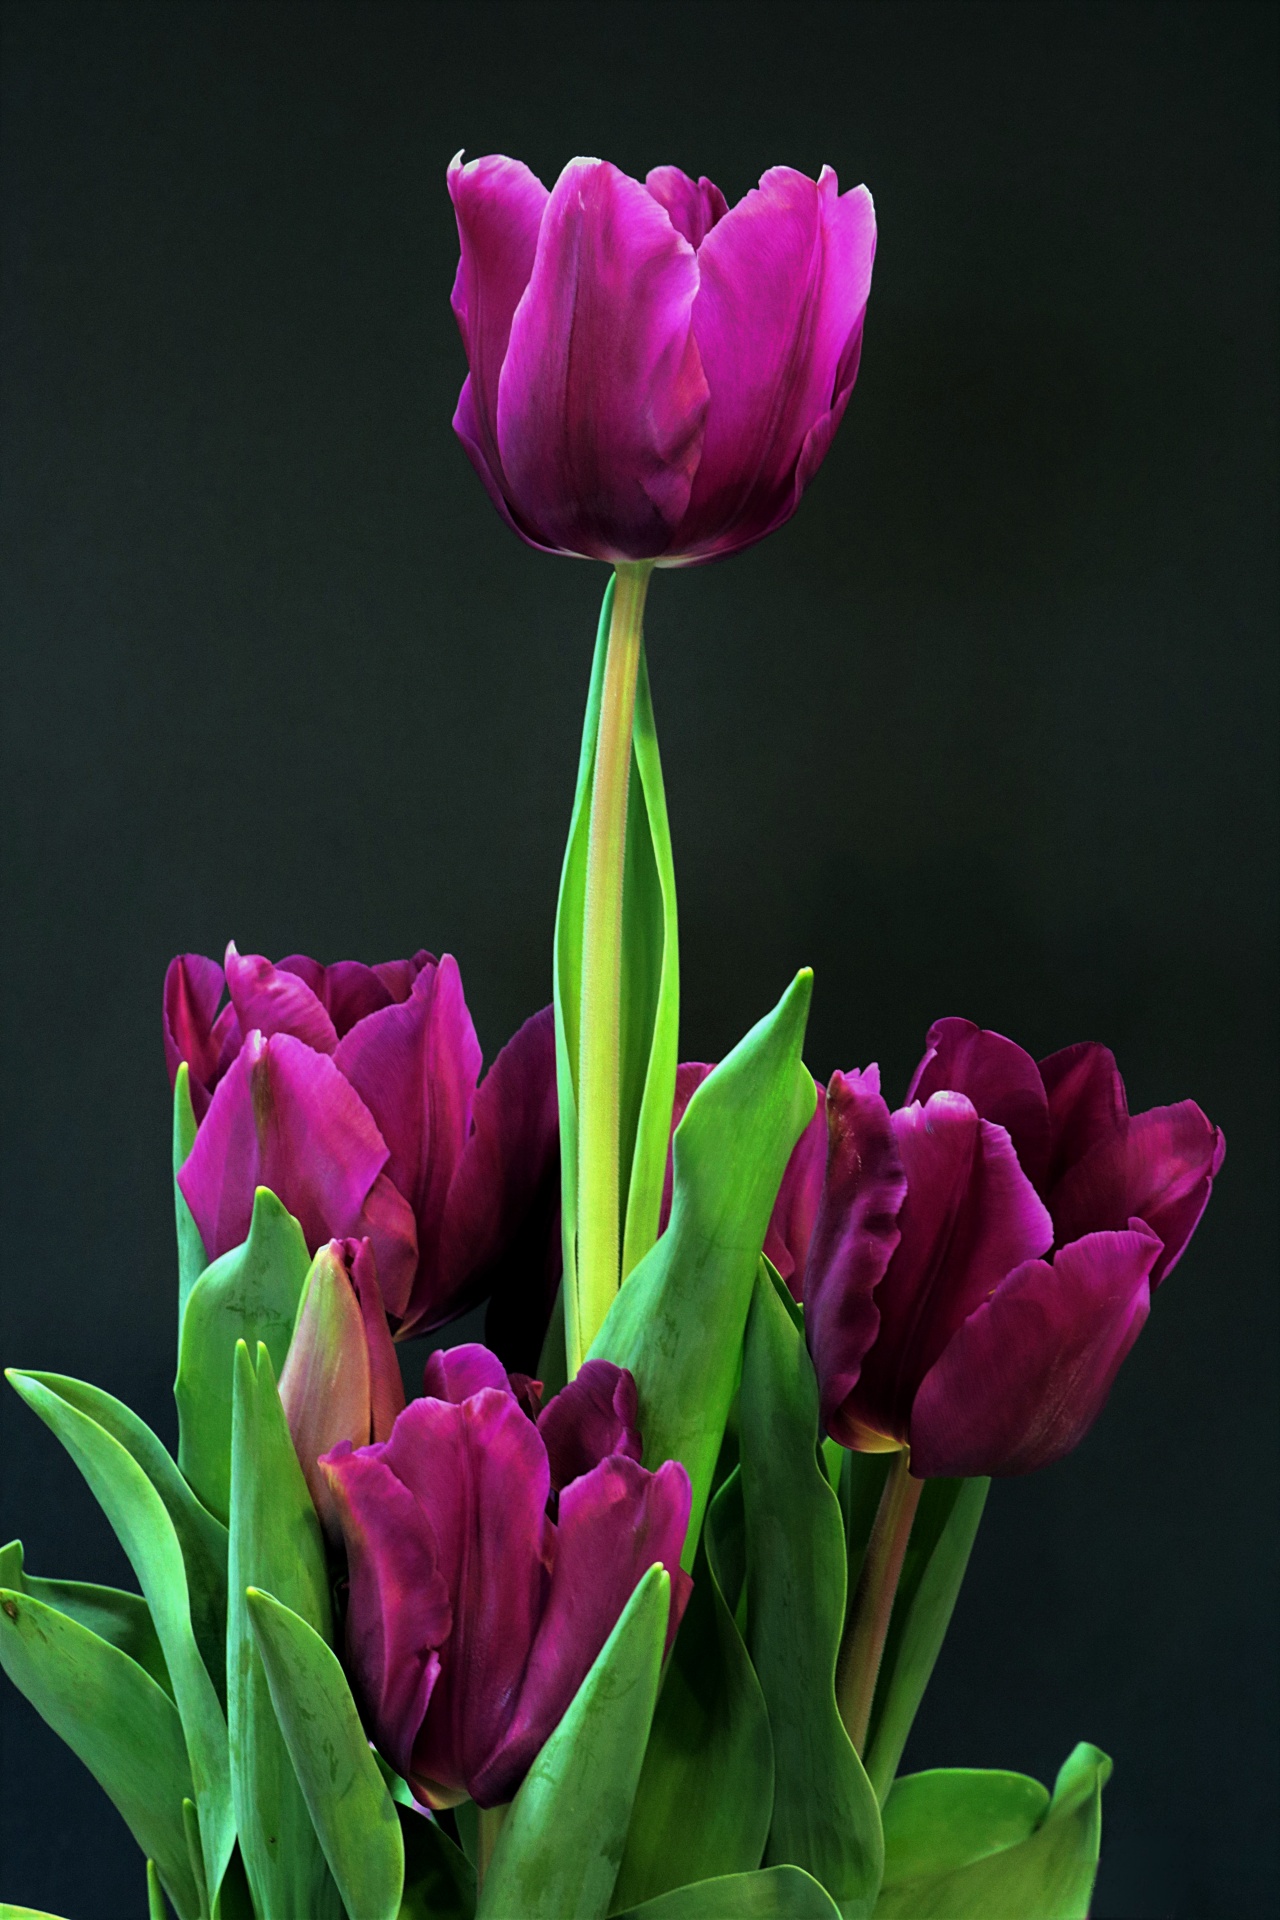 A group of deep purple tulips, with one standing tall among the other, with green leaves, isolated on a solid black background.